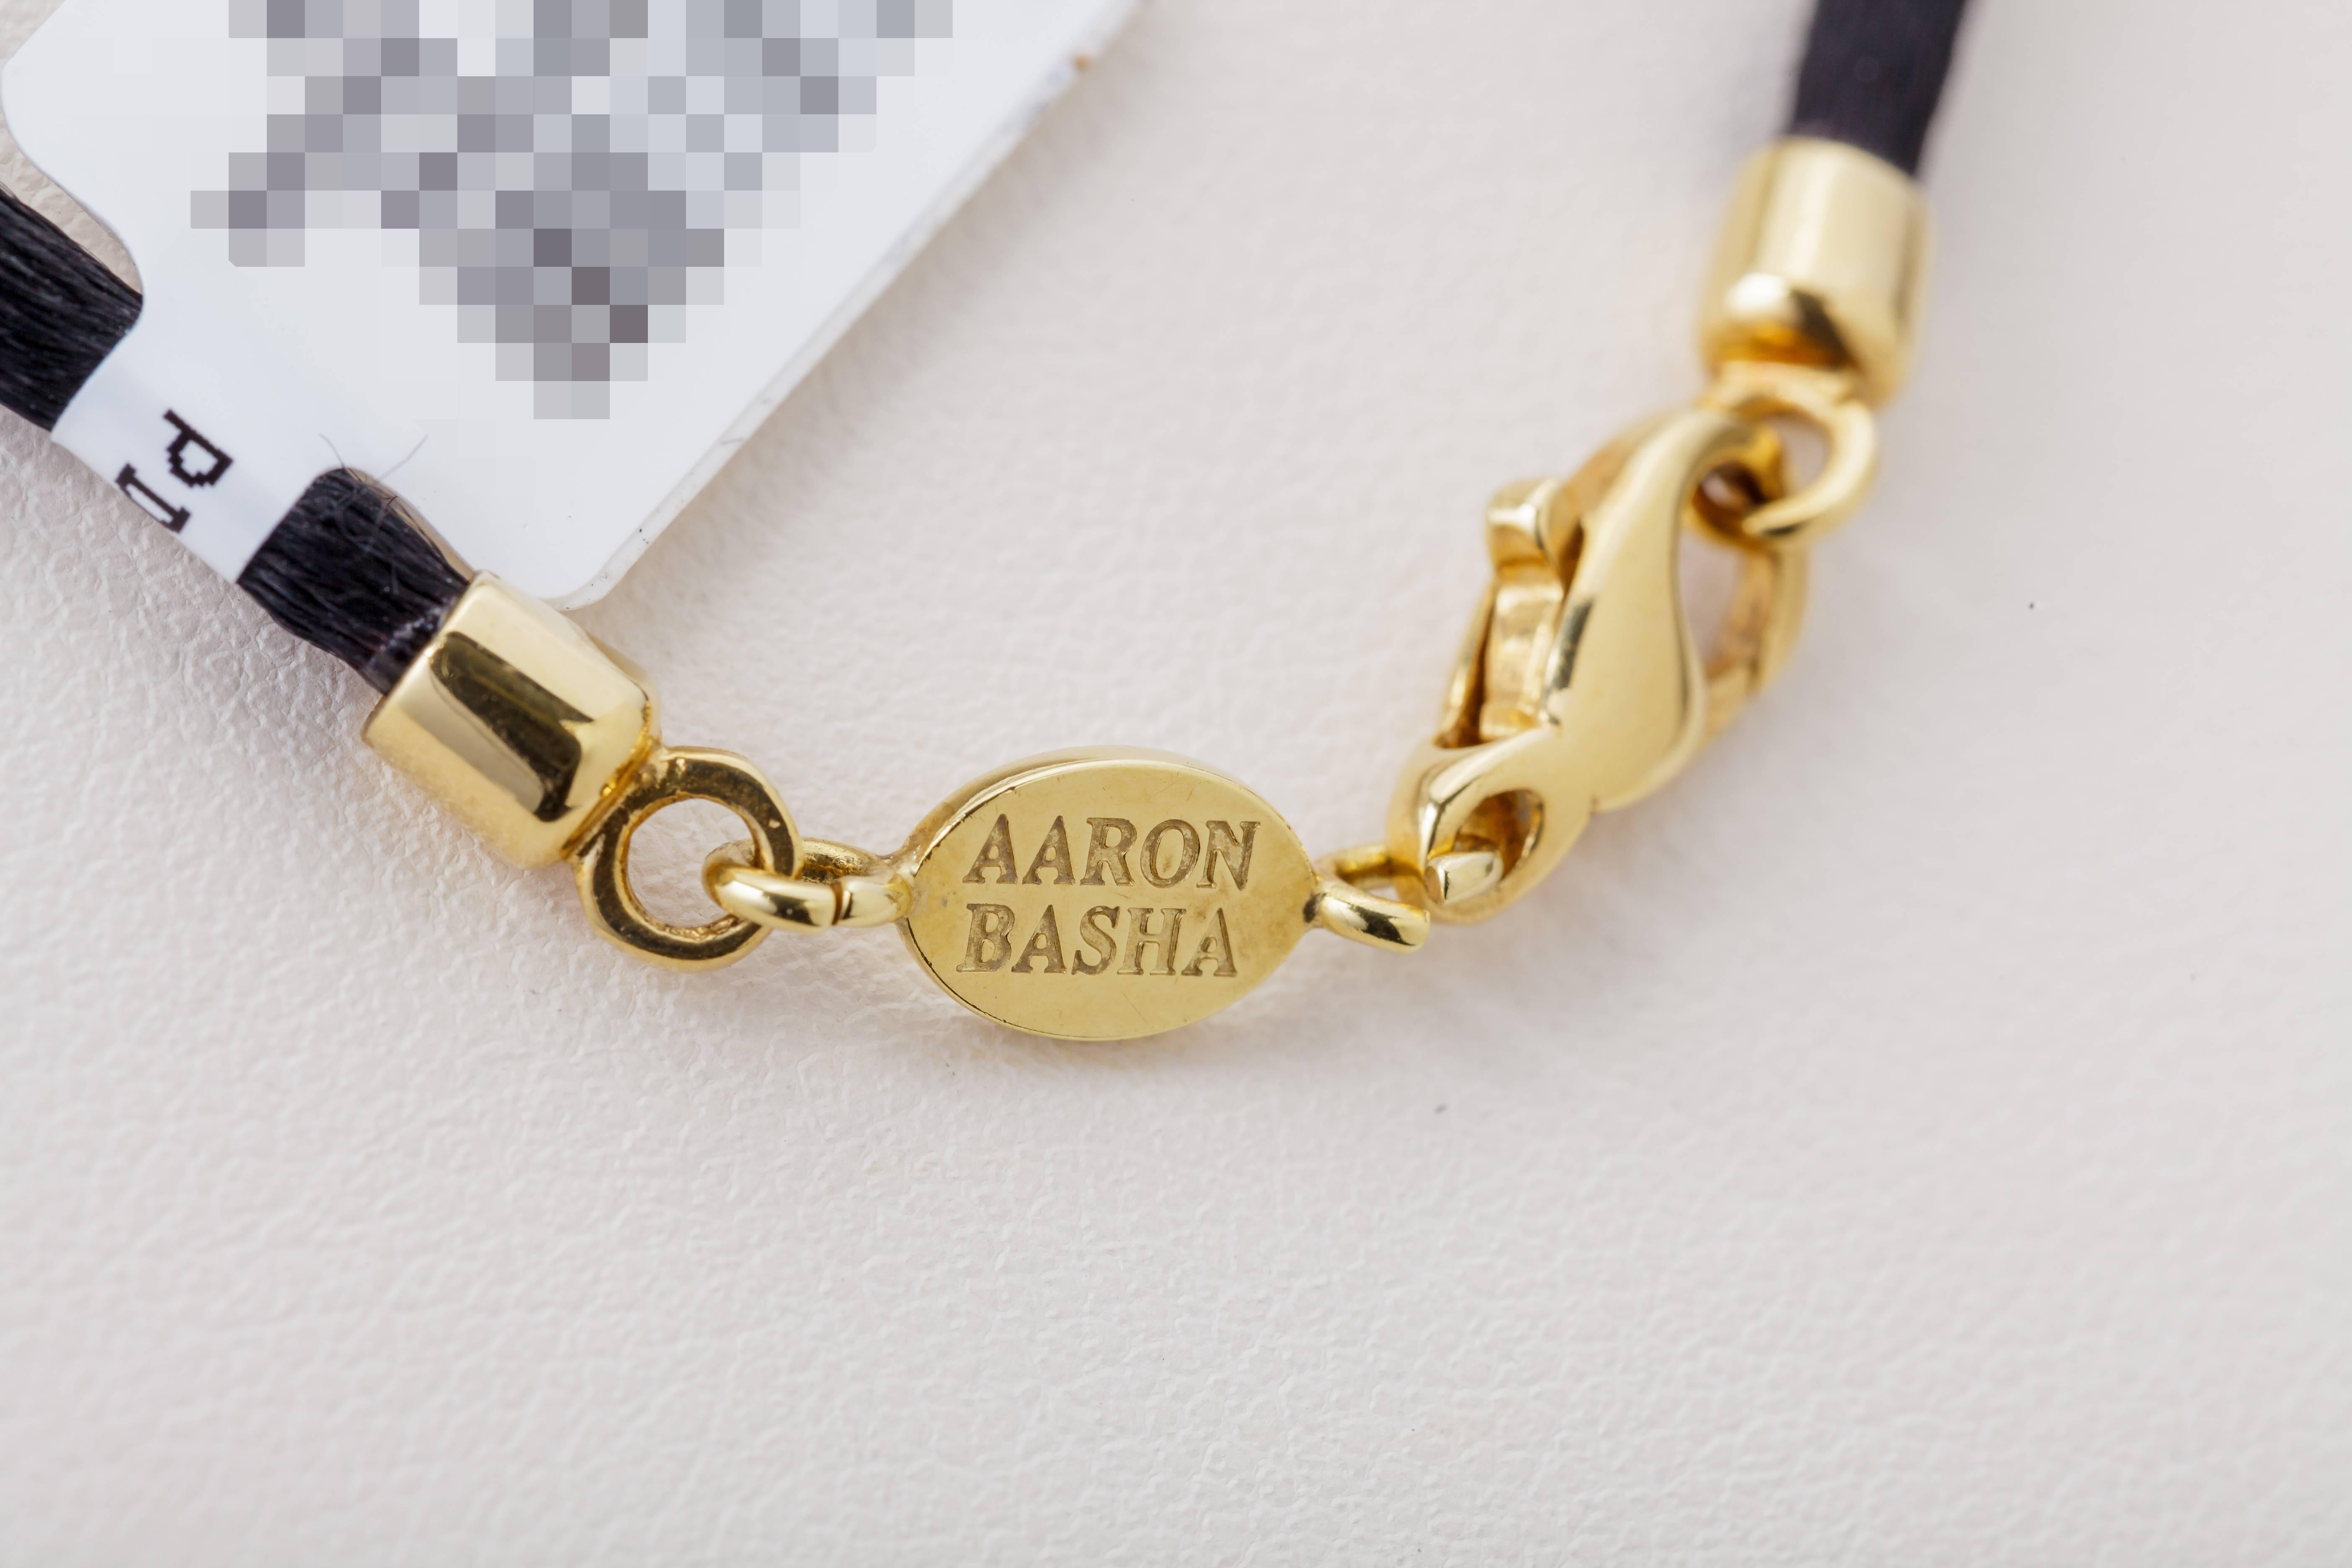 Aaron Basha Oval Pendant Clasp on Black Cord 18 Karat Gold Diamond 0.04 Carat In New Condition For Sale In Houston, TX